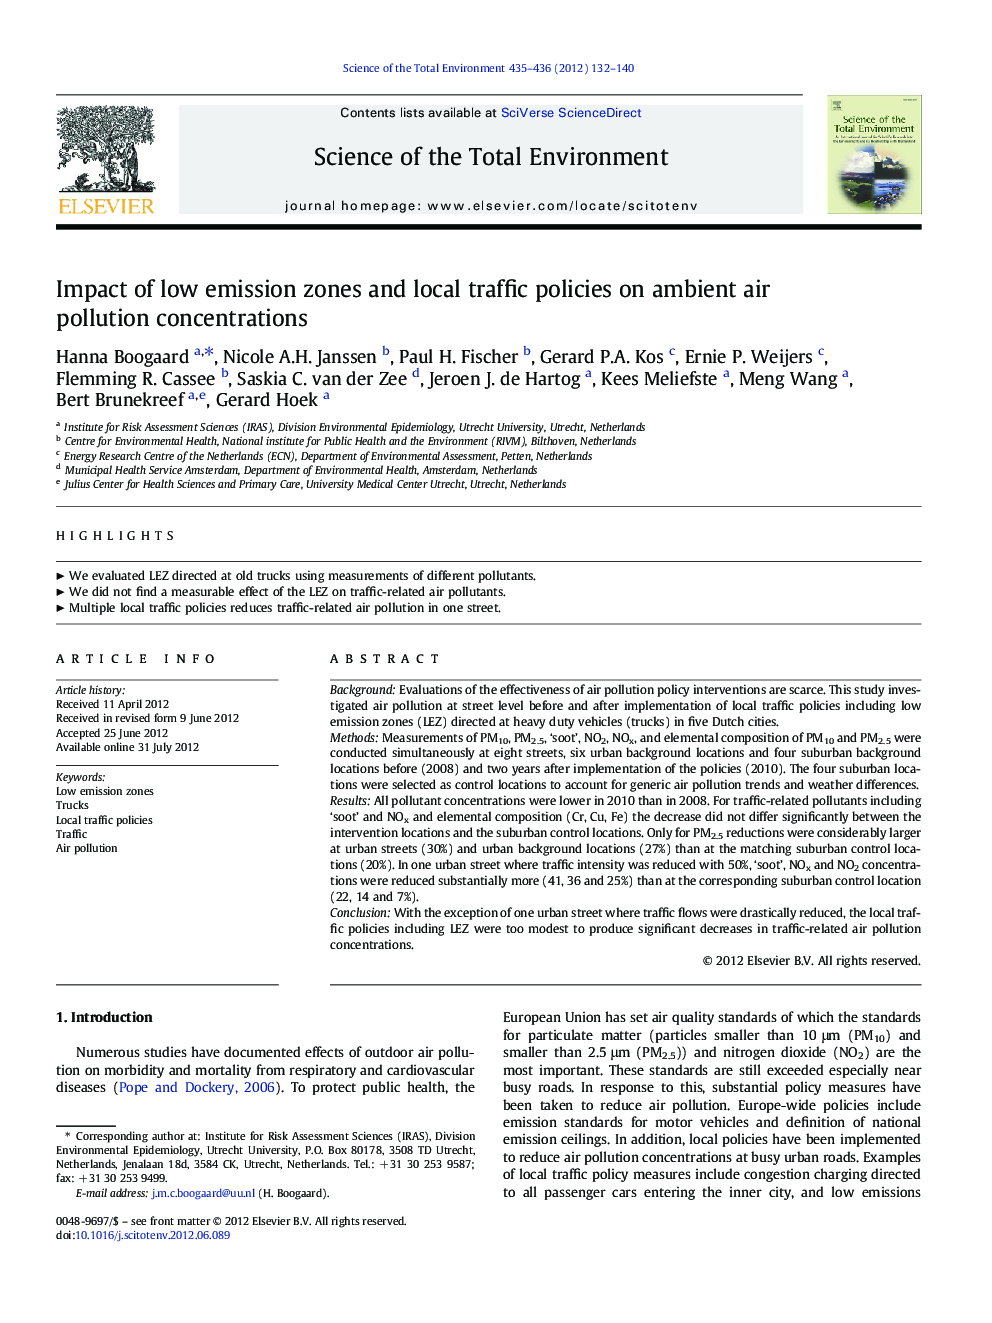 Impact of low emission zones and local traffic policies on ambient air pollution concentrations